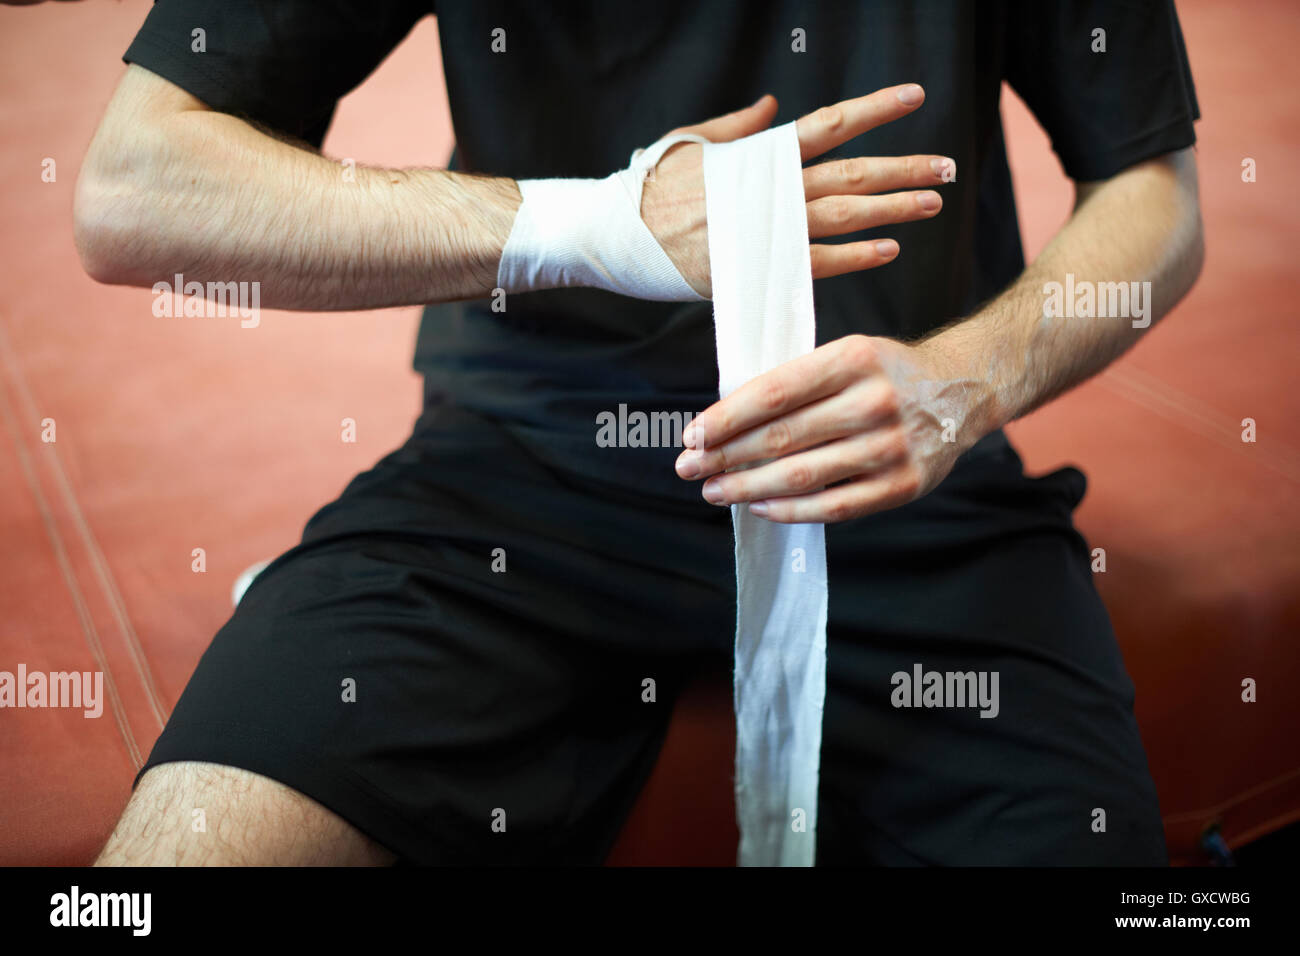 Boxer bandaging hands before putting on gloves, mid section Stock Photo